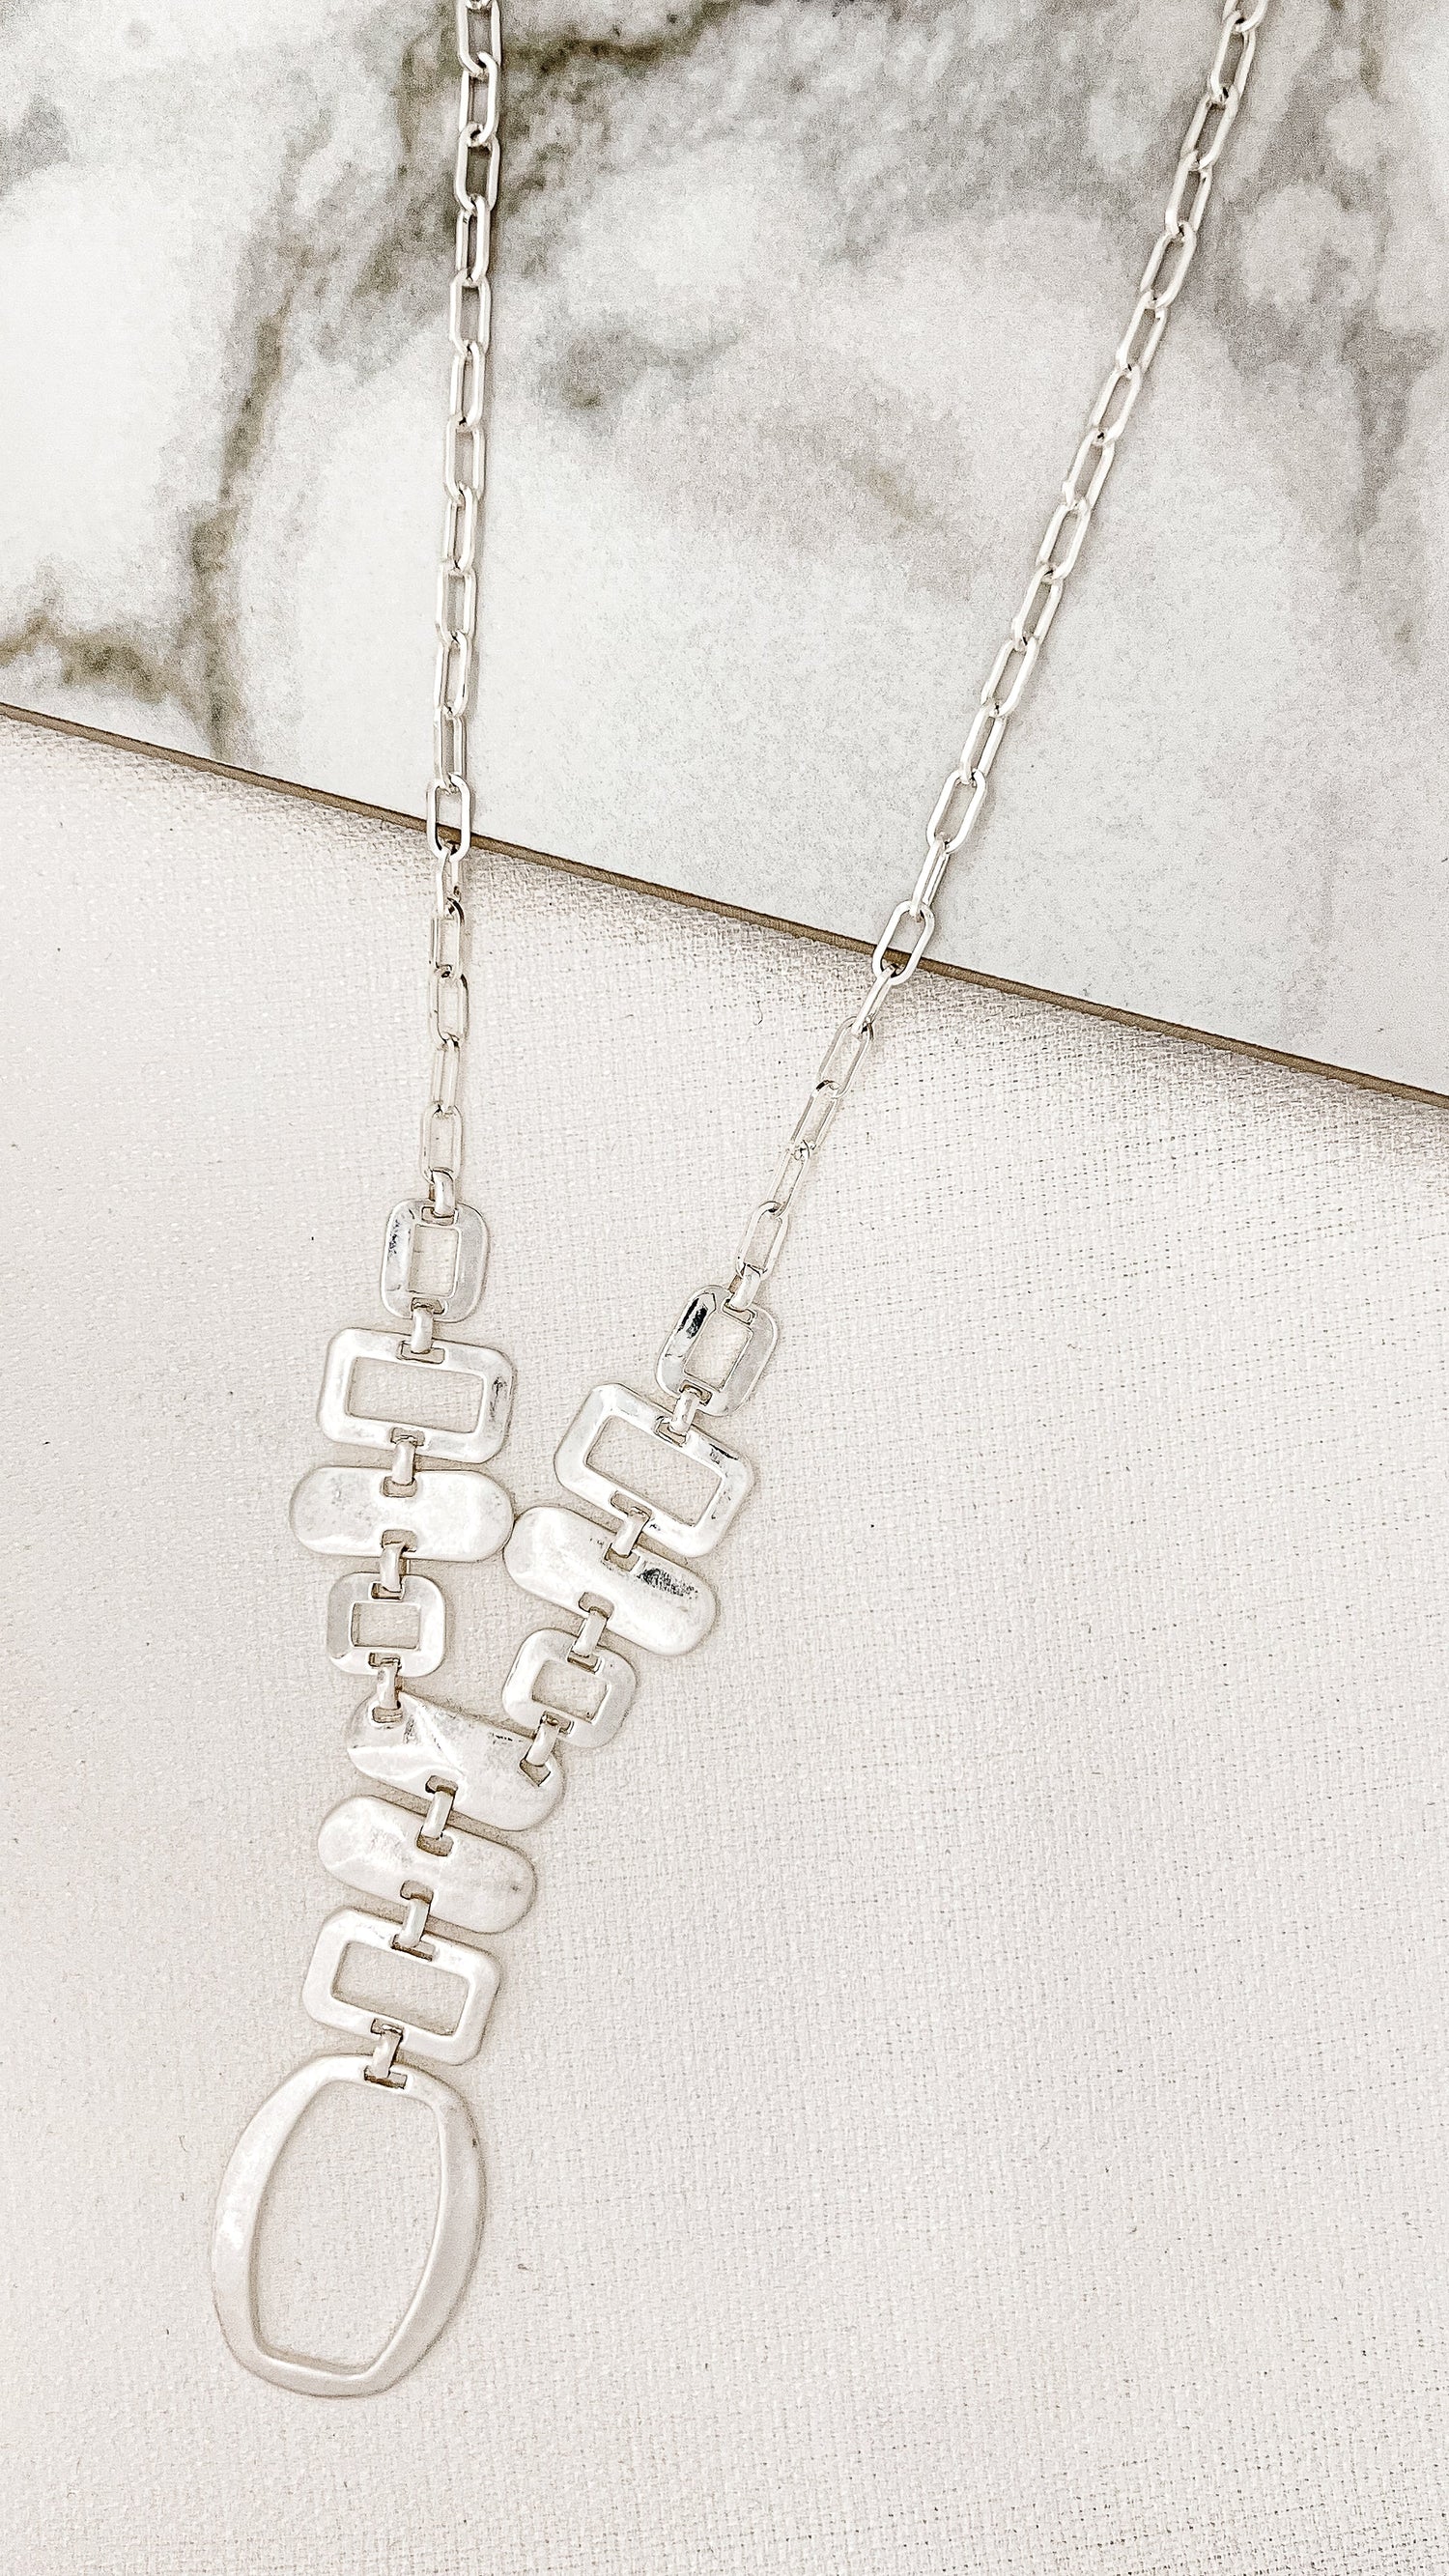 Long Necklace With Square Pendant